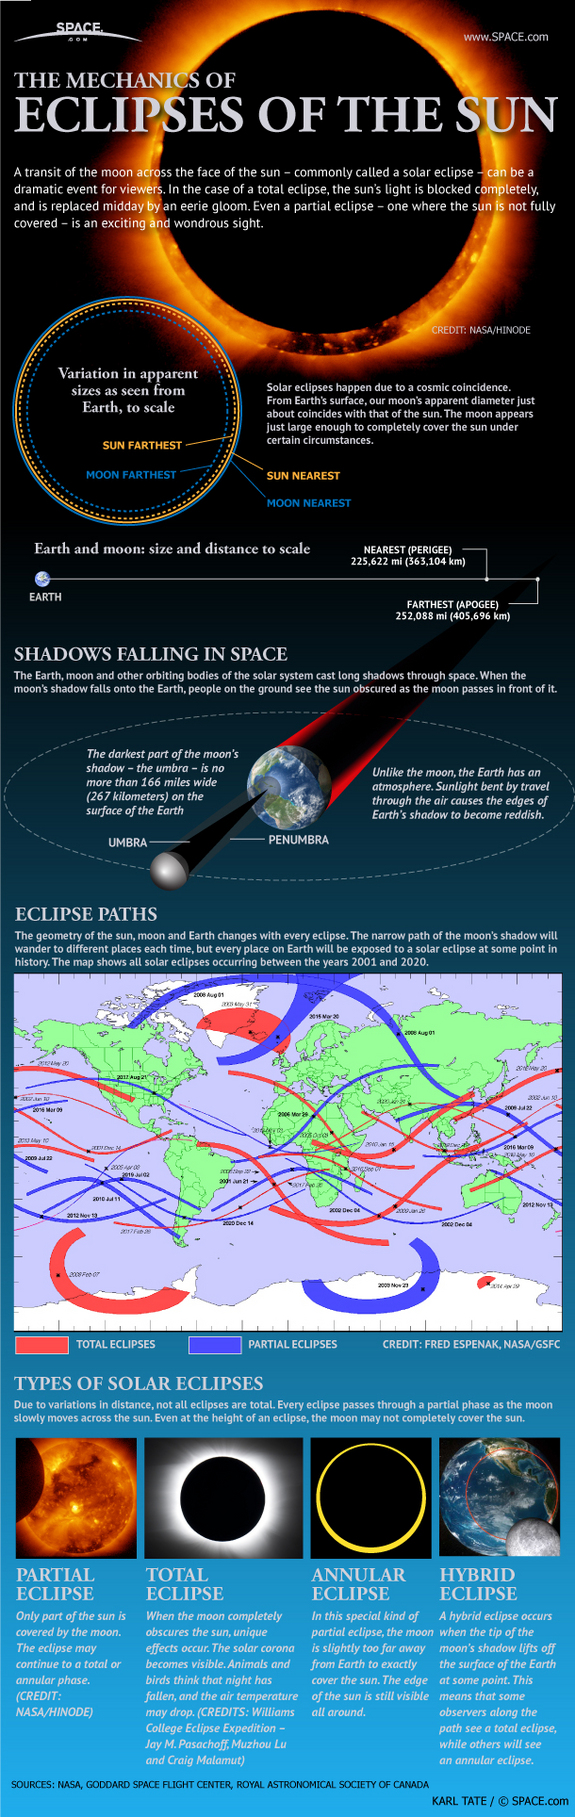 Find out what happens when the moon crosses in front of the sun in this SPACE.com infographic.